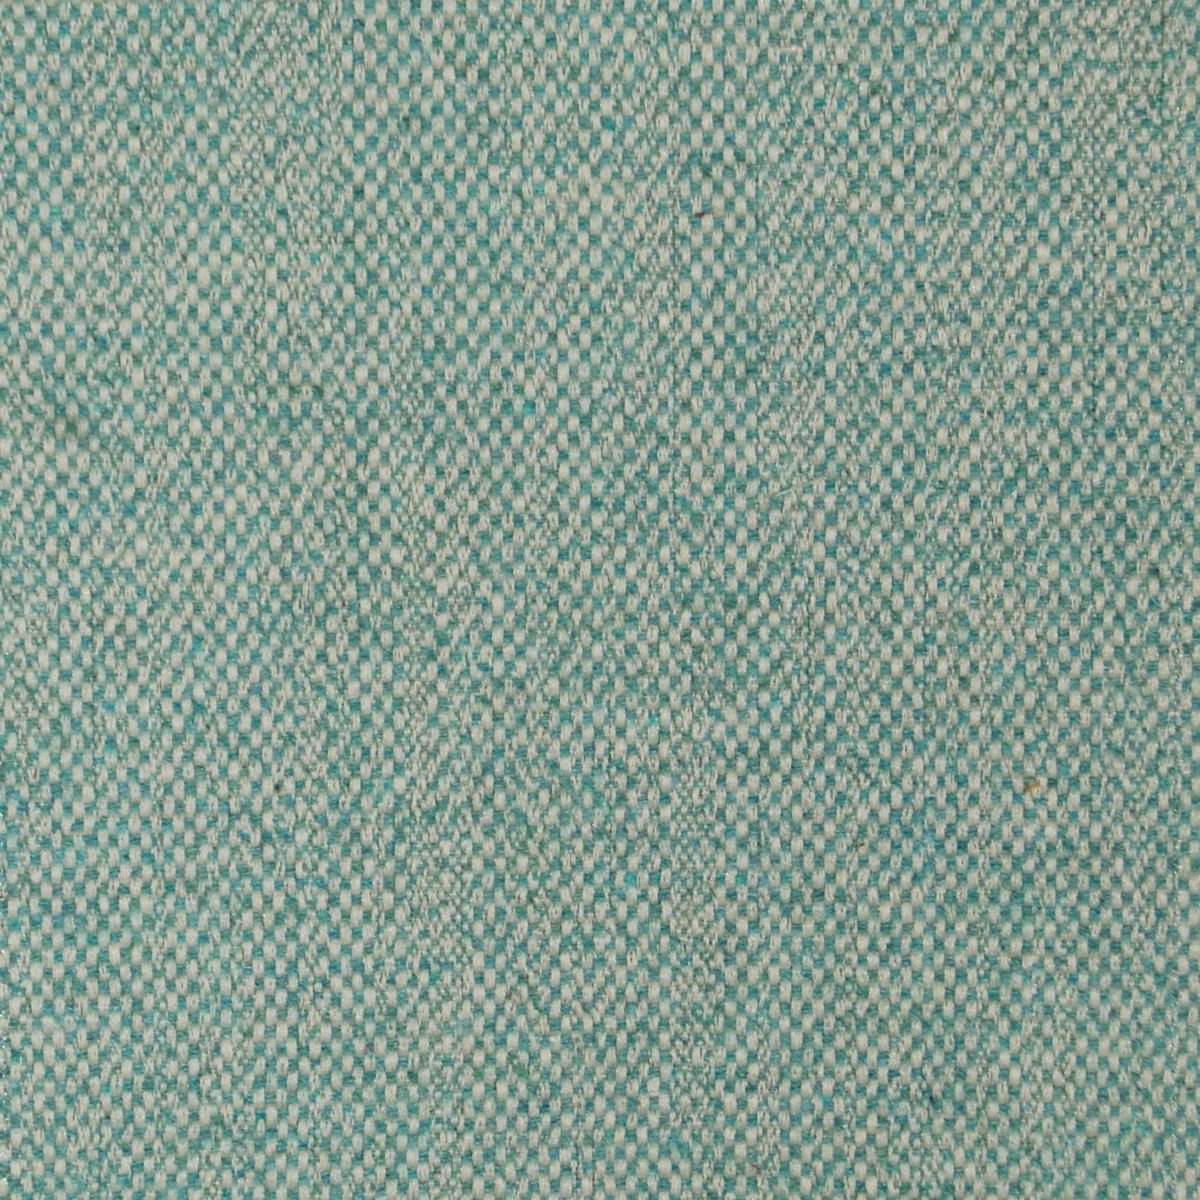 Selkirk Ocean Fabric by Voyage Maison